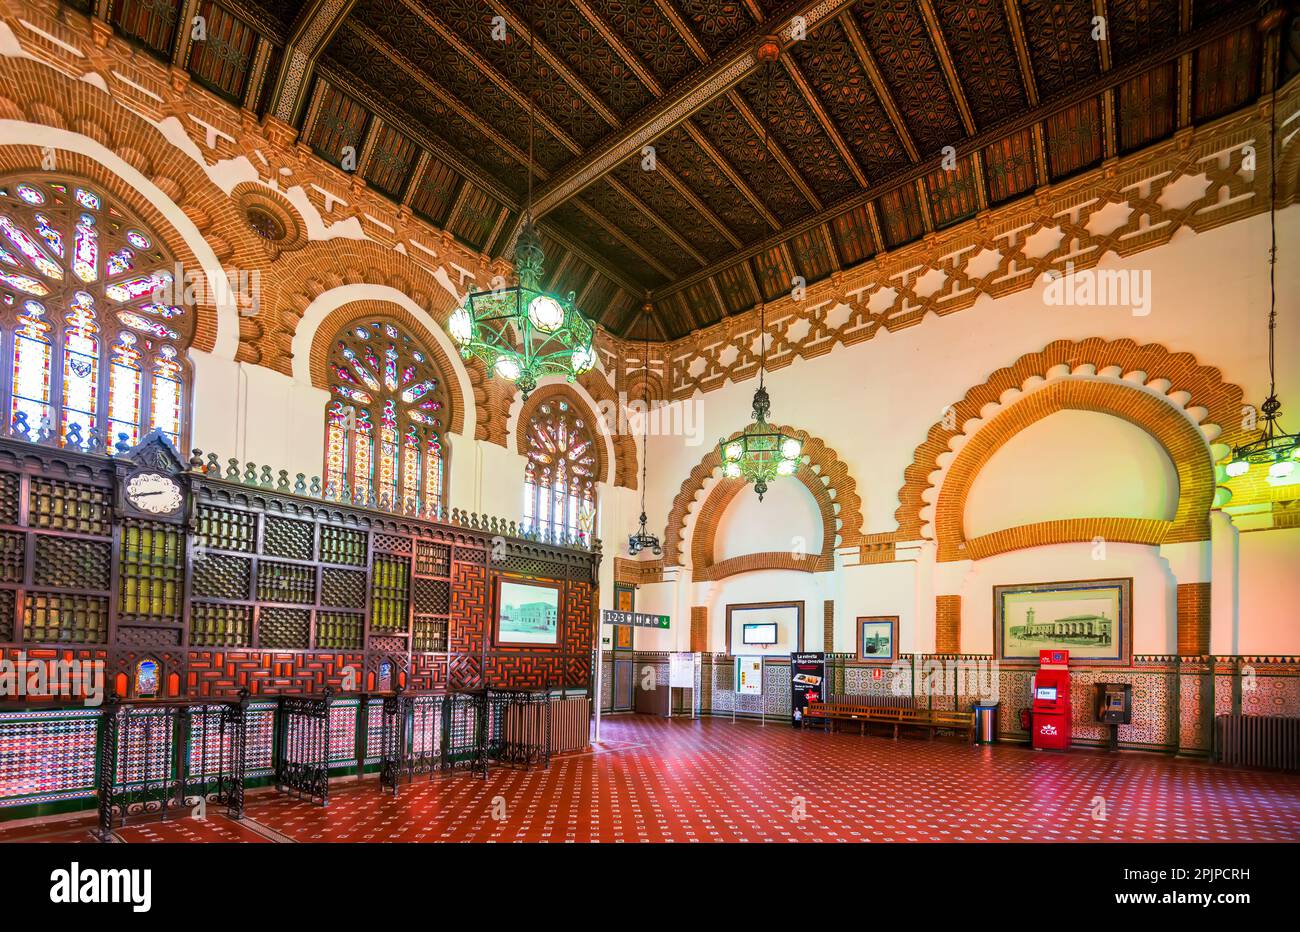 Toledo, Spain. Toledo railway station is a historic transportation hub located in the heart of old city, built in Neo-Mudejar style. Stock Photo